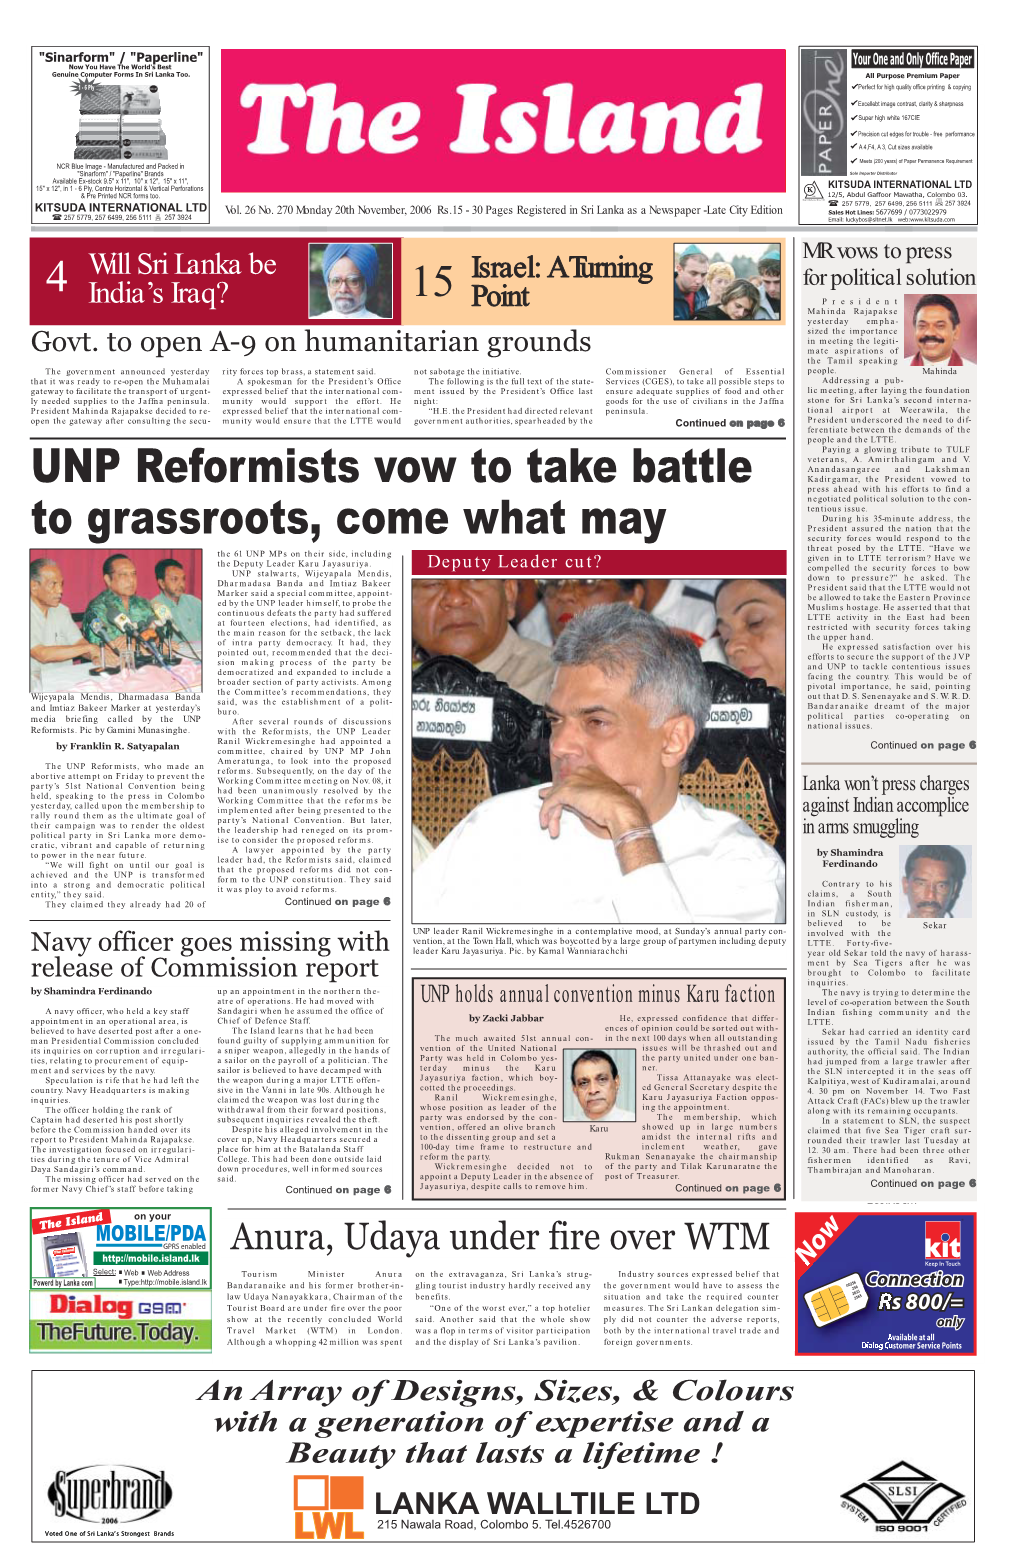 UNP Reformists Vow to Take Battle to Grassroots, Come What